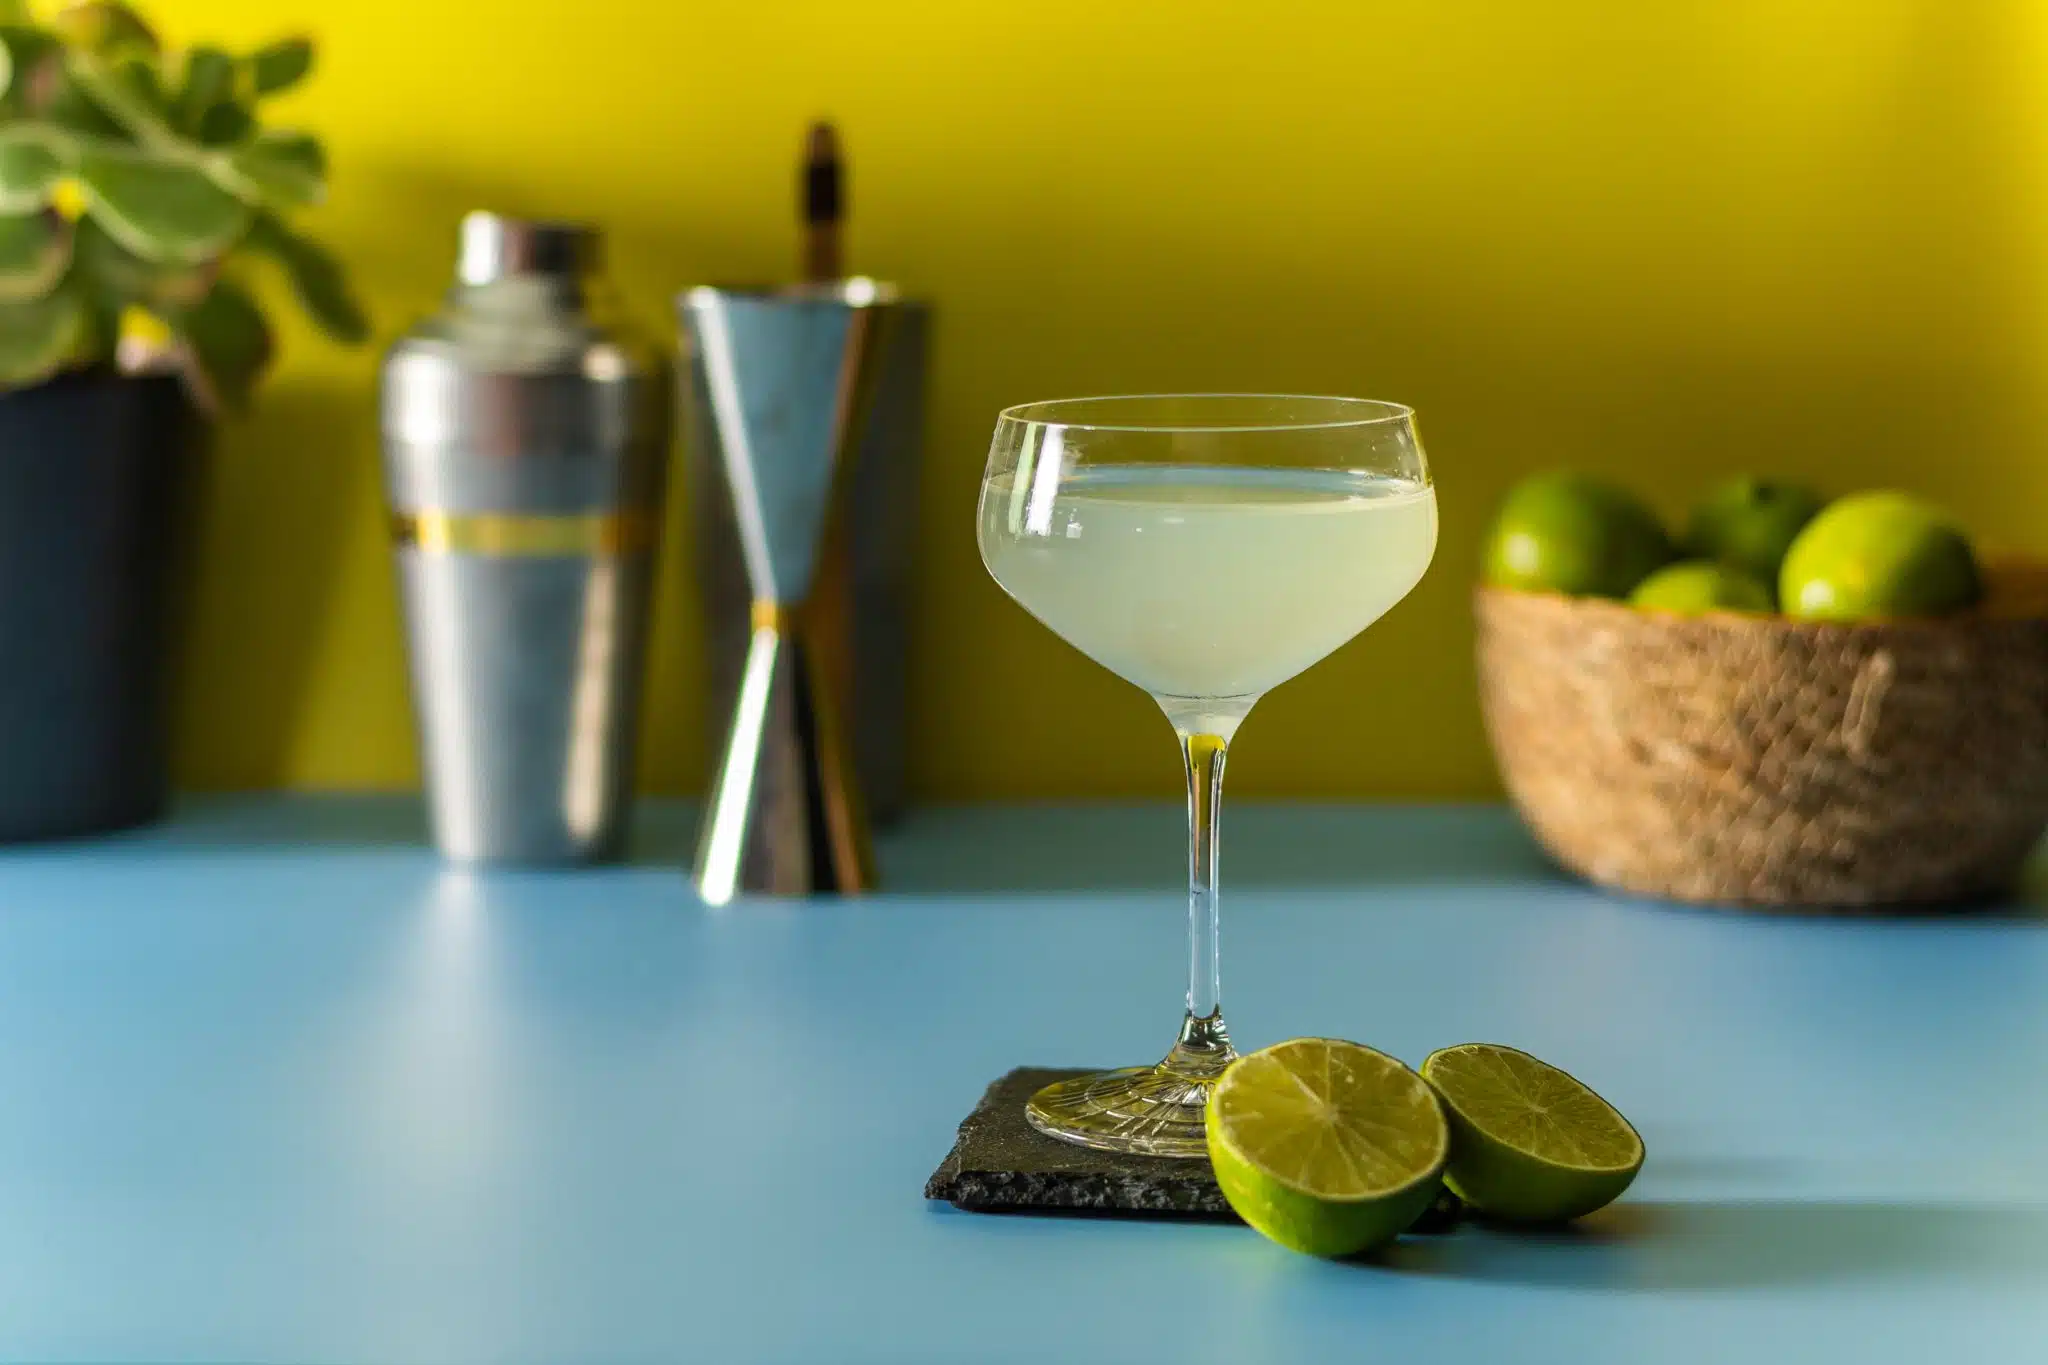 A side shot of a Daiquiri cocktail in a coupe glass on a black stone plate placed on a blue table with two half miles in front and a shaker, a jigger and a basket with limes on the background.